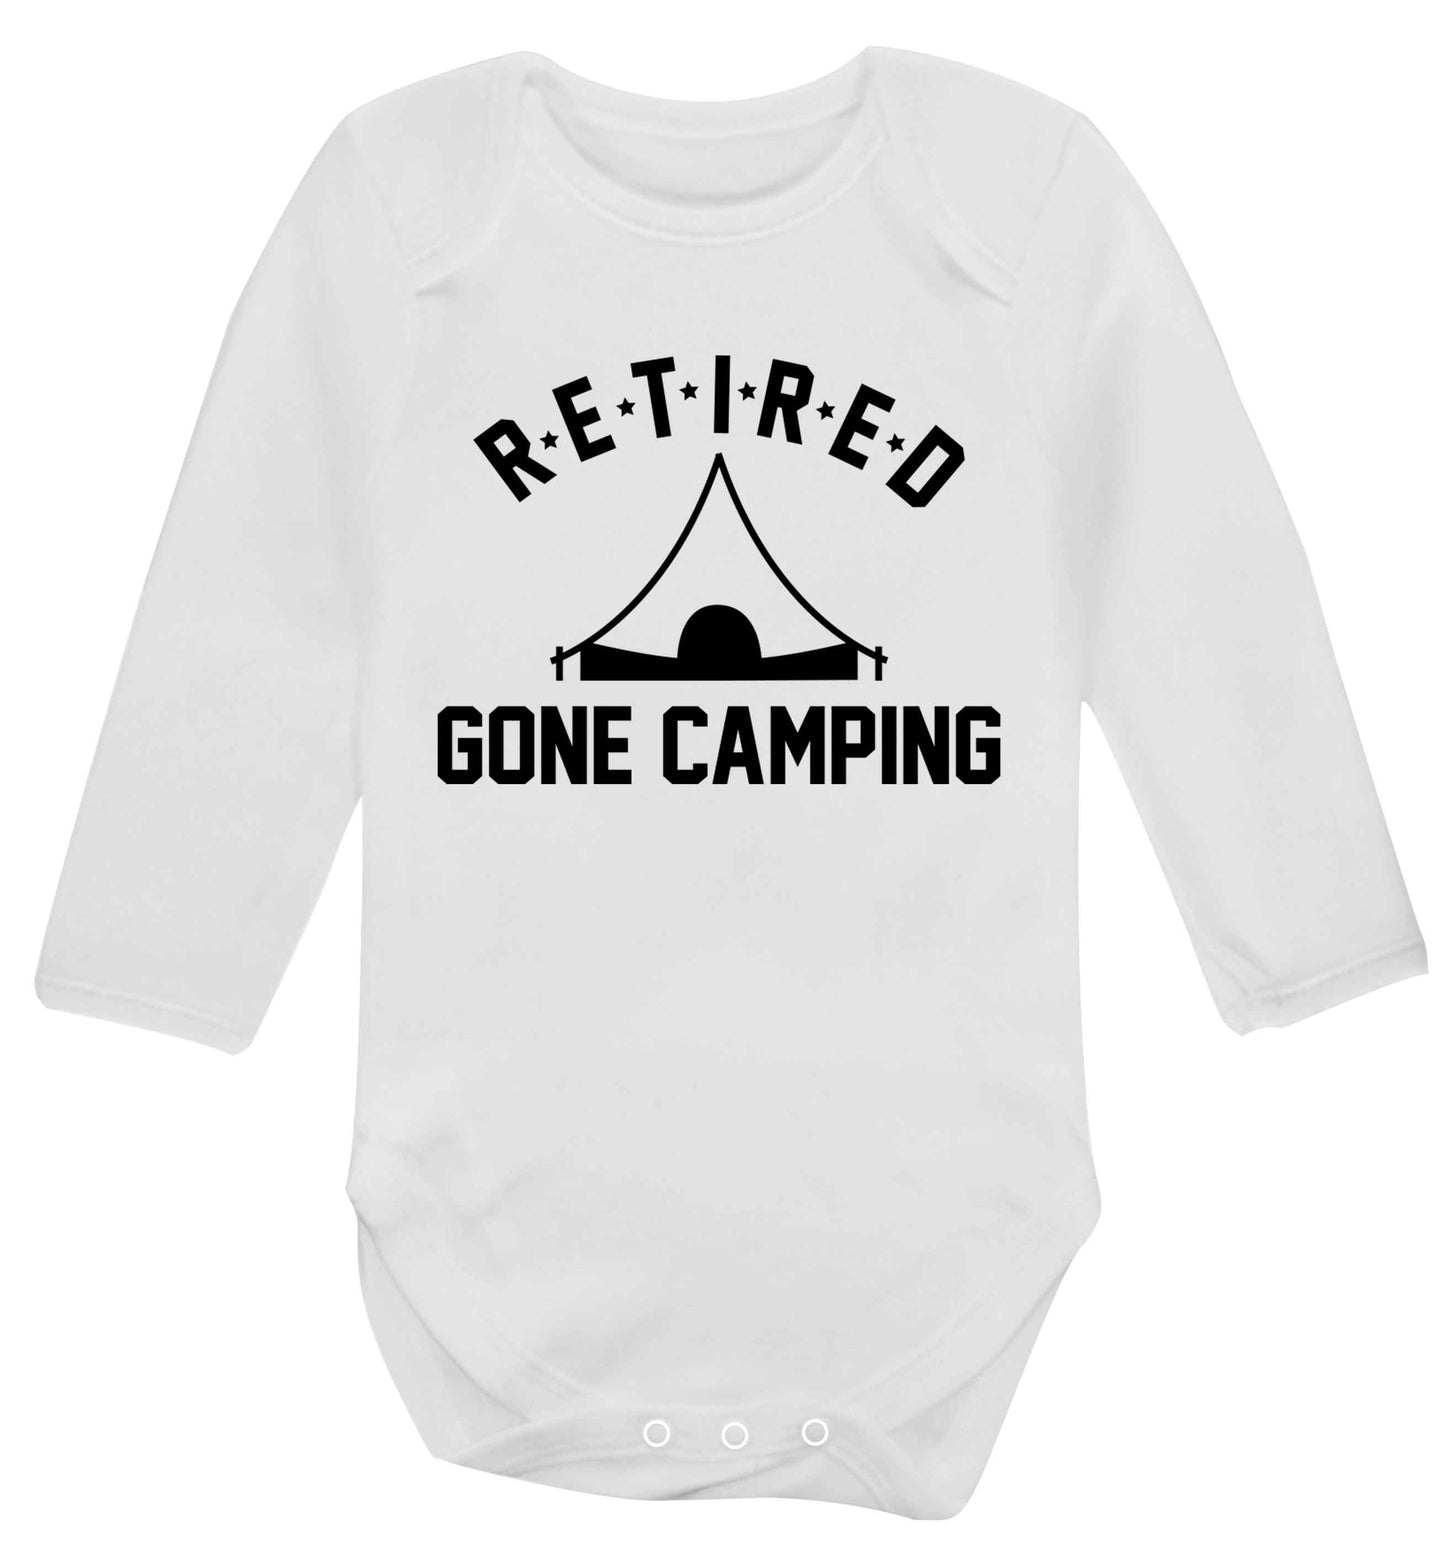 Retired gone camping Baby Vest long sleeved white 6-12 months